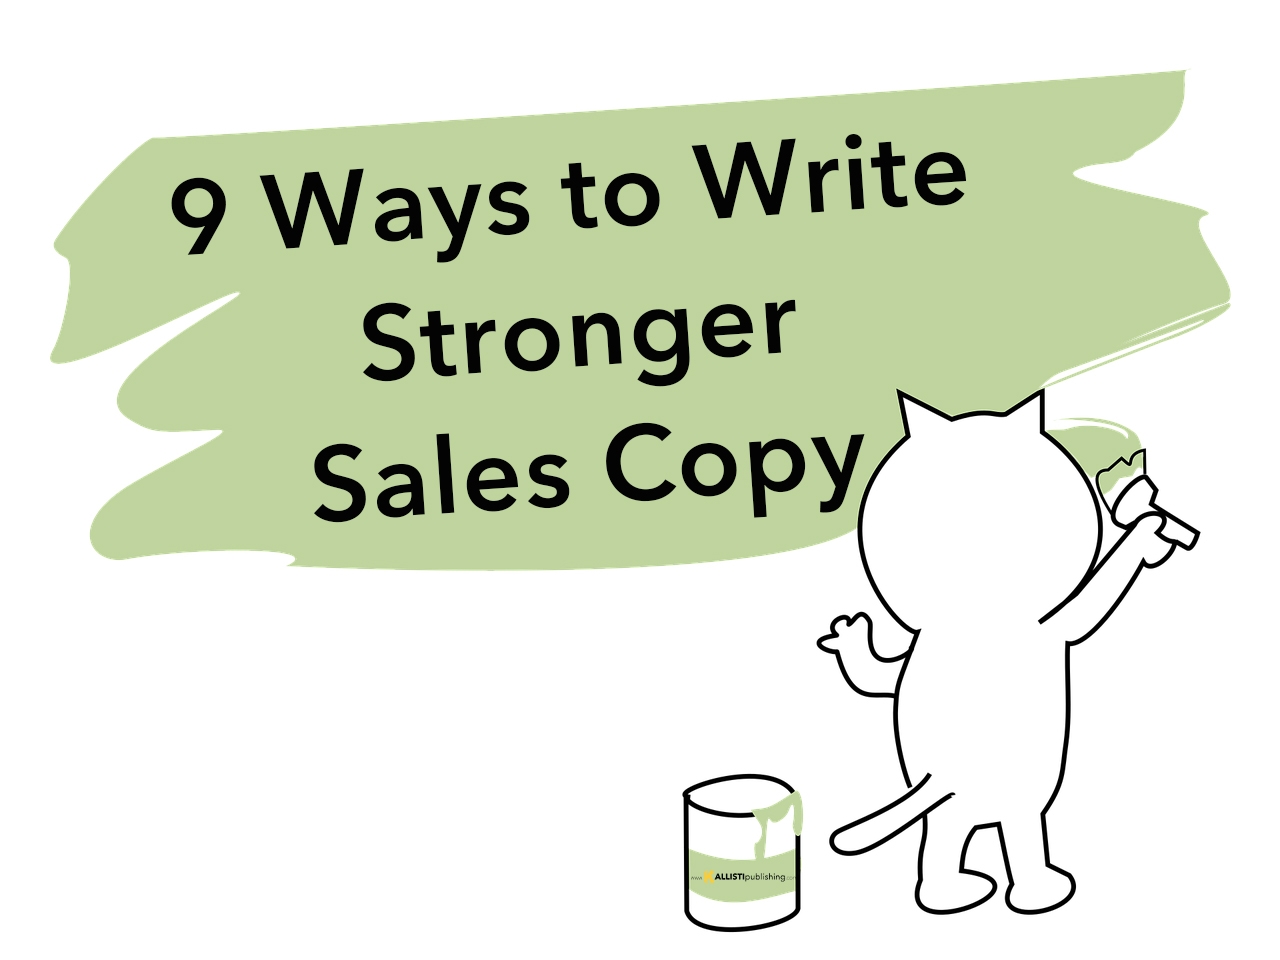 9 ways to write stronger sales copy